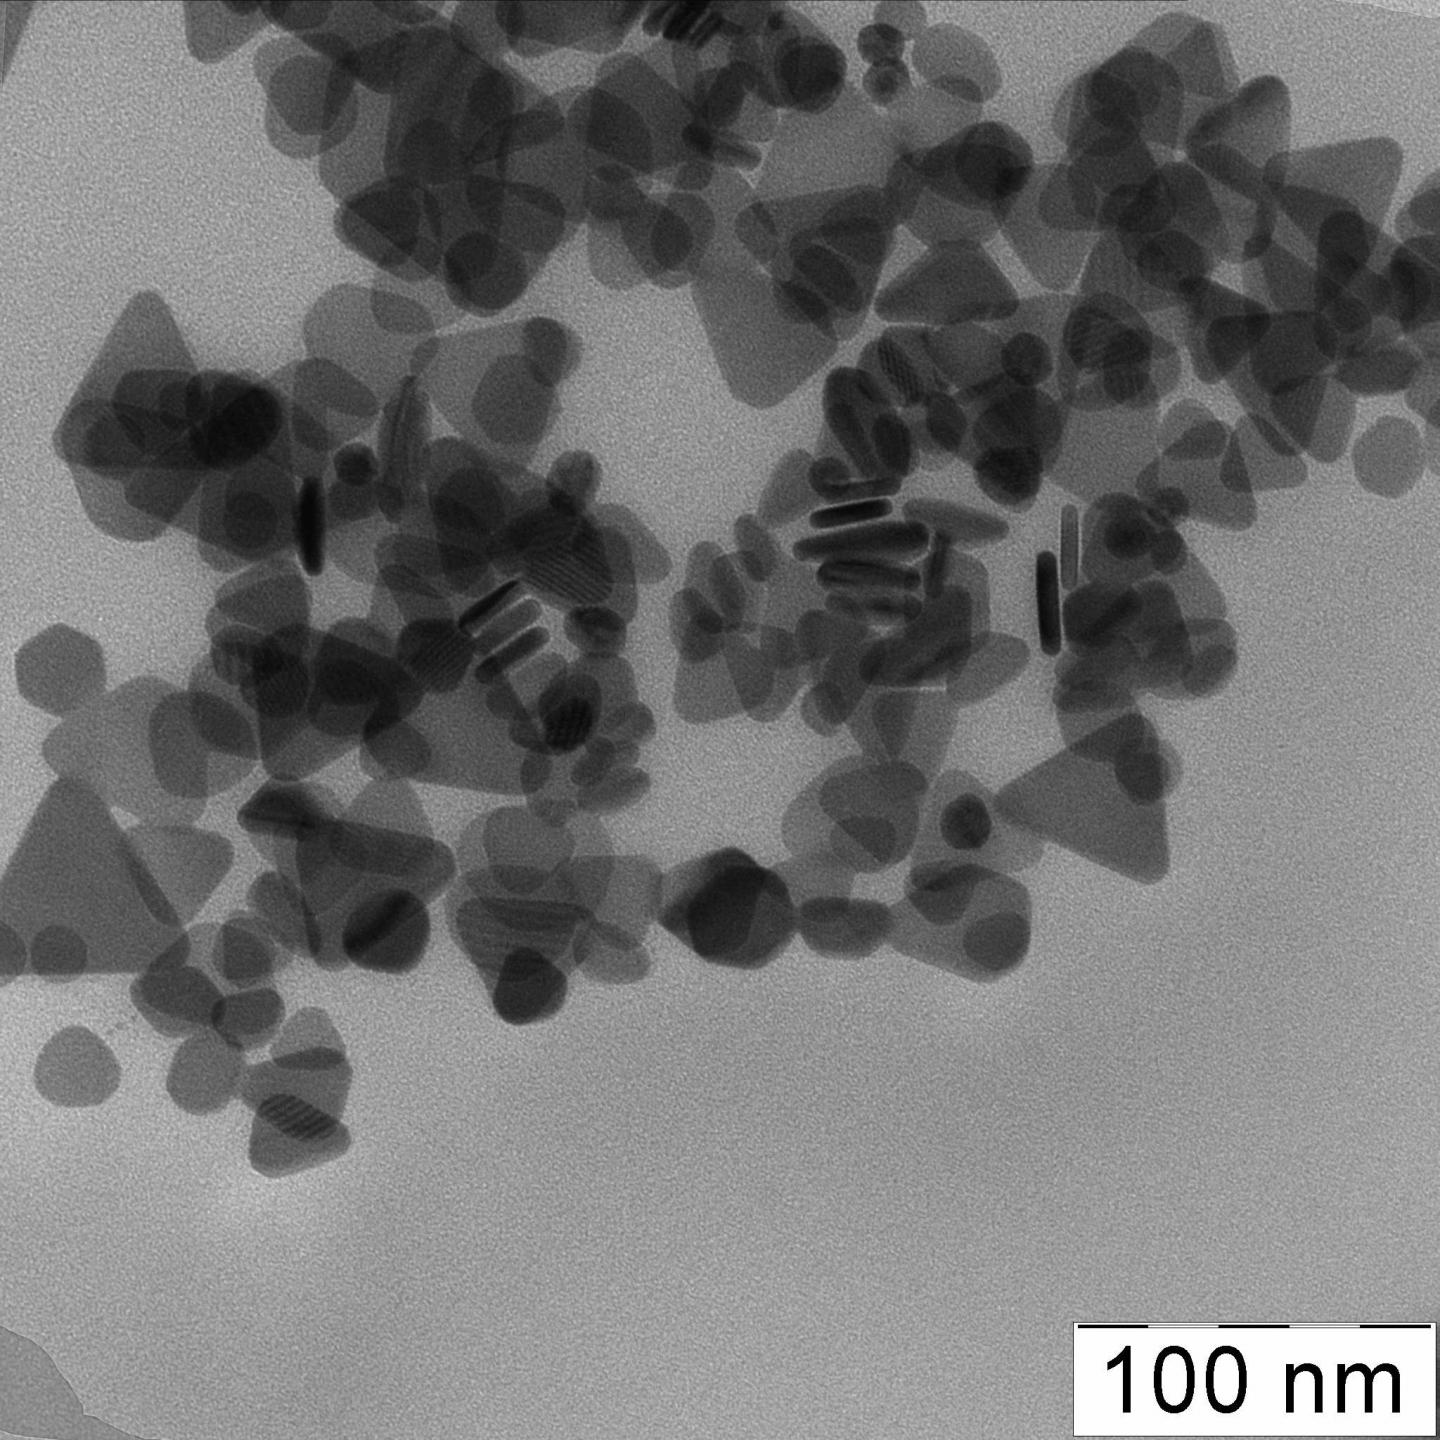 Nanoparticles of Silver